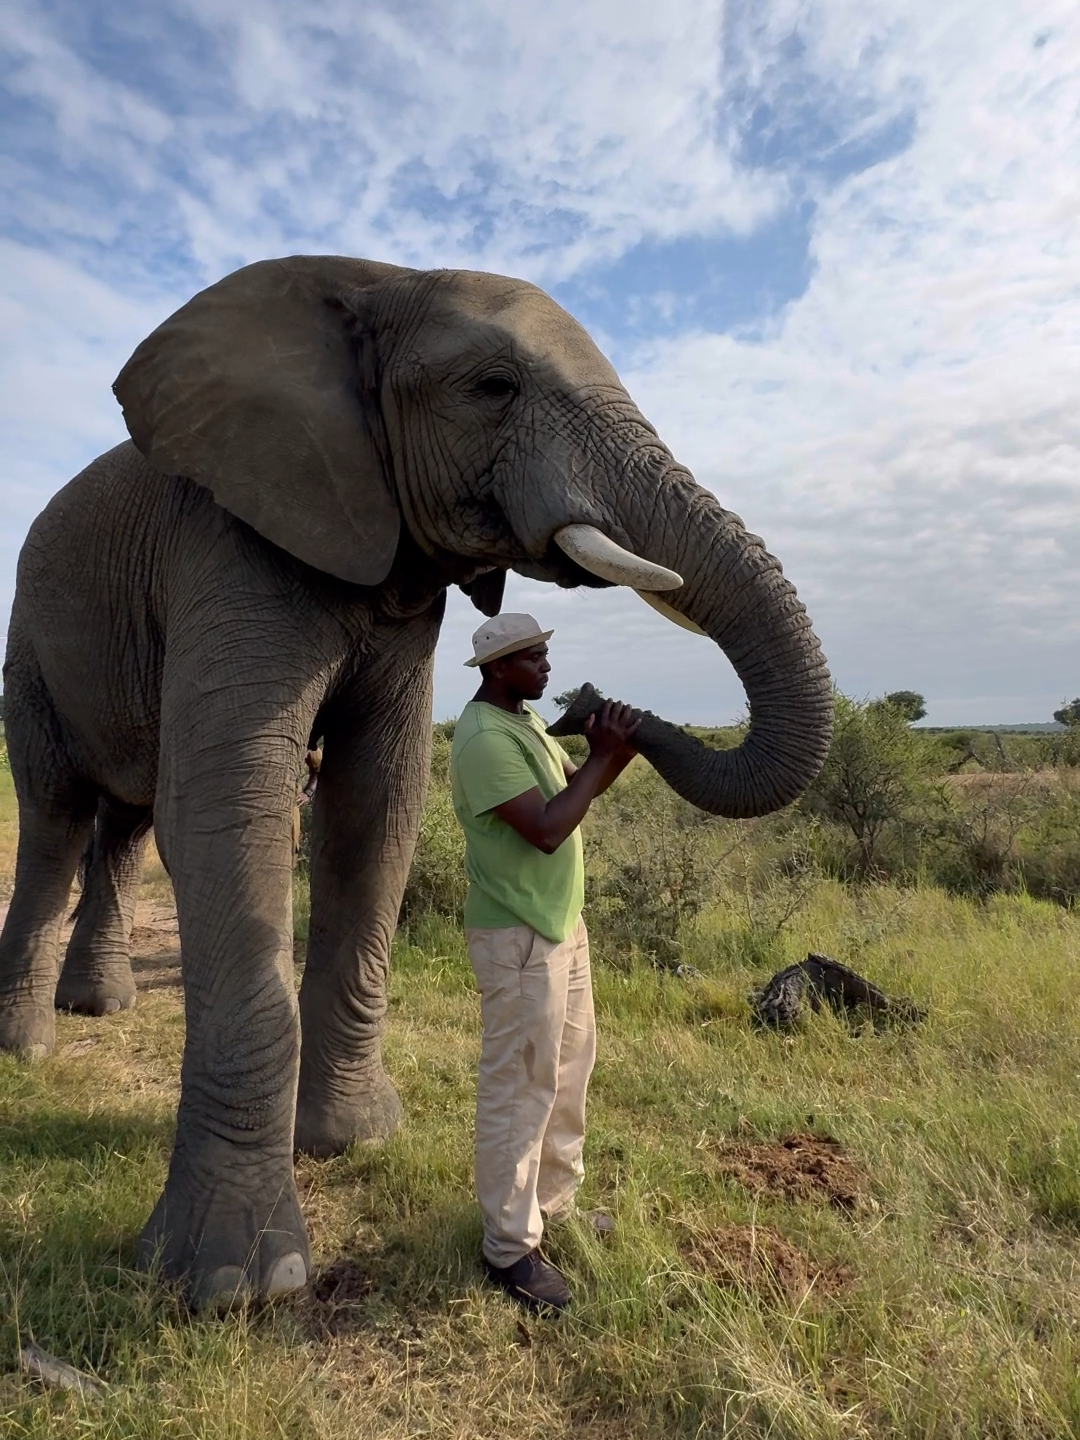 Trunk greetings with Jabulani, Reply and Tichaona 💚 Did you know that carers gently blow into their trunks so the elephants can identify them by scent, as they do with members of the elephant herd 🐘 #everyelephantneedsaherd #herdelephants #herdsouthafrica #elephantherd #elephants